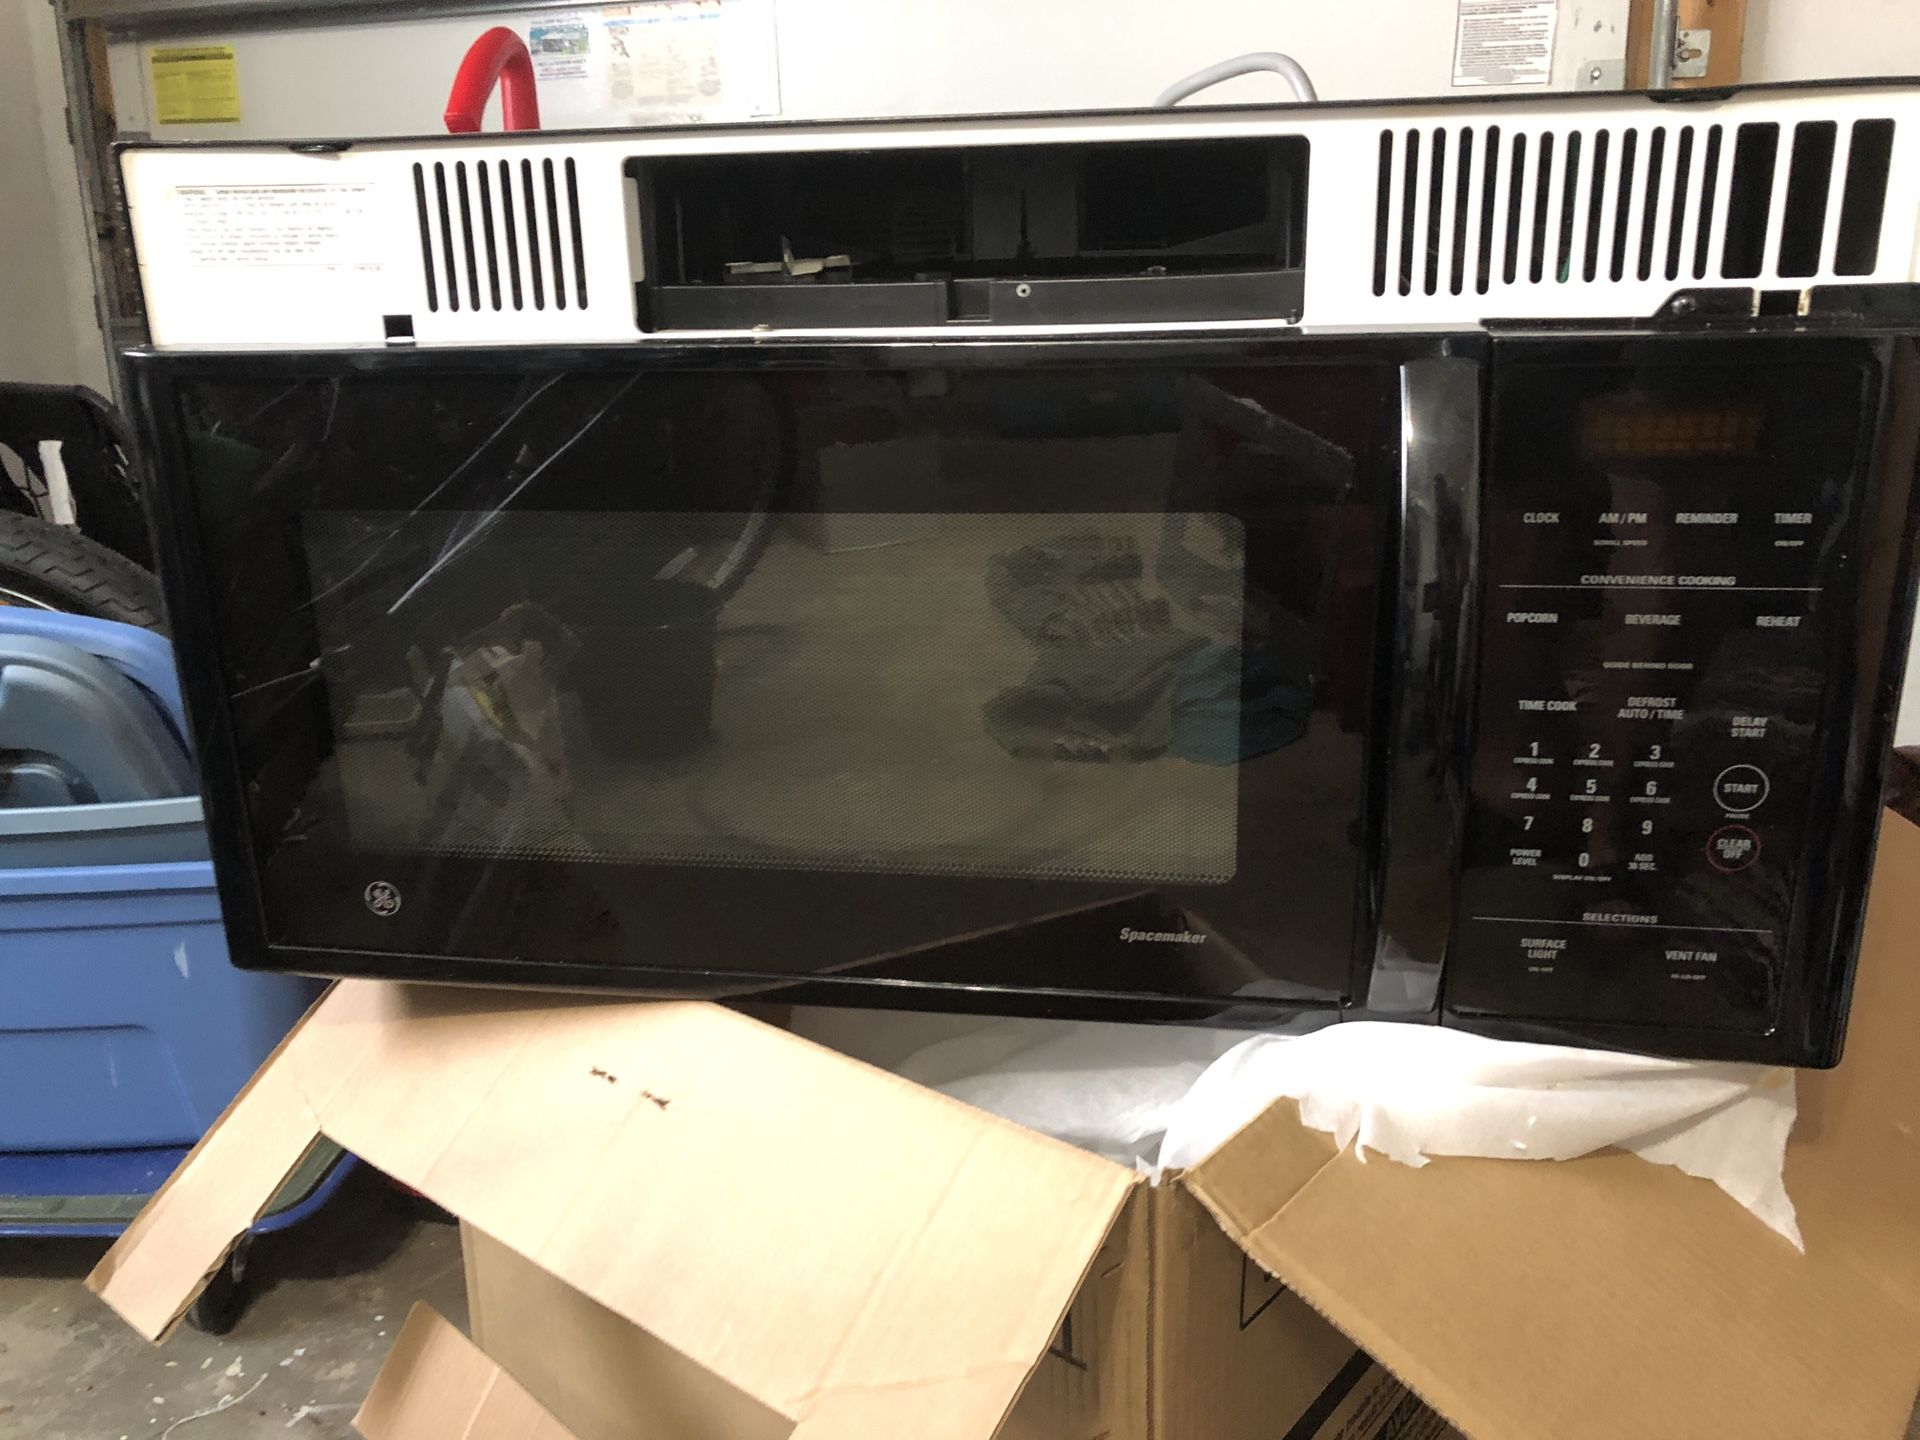 GE Spacemaker Over-the-Range Microwave Oven with Recirculating Vent